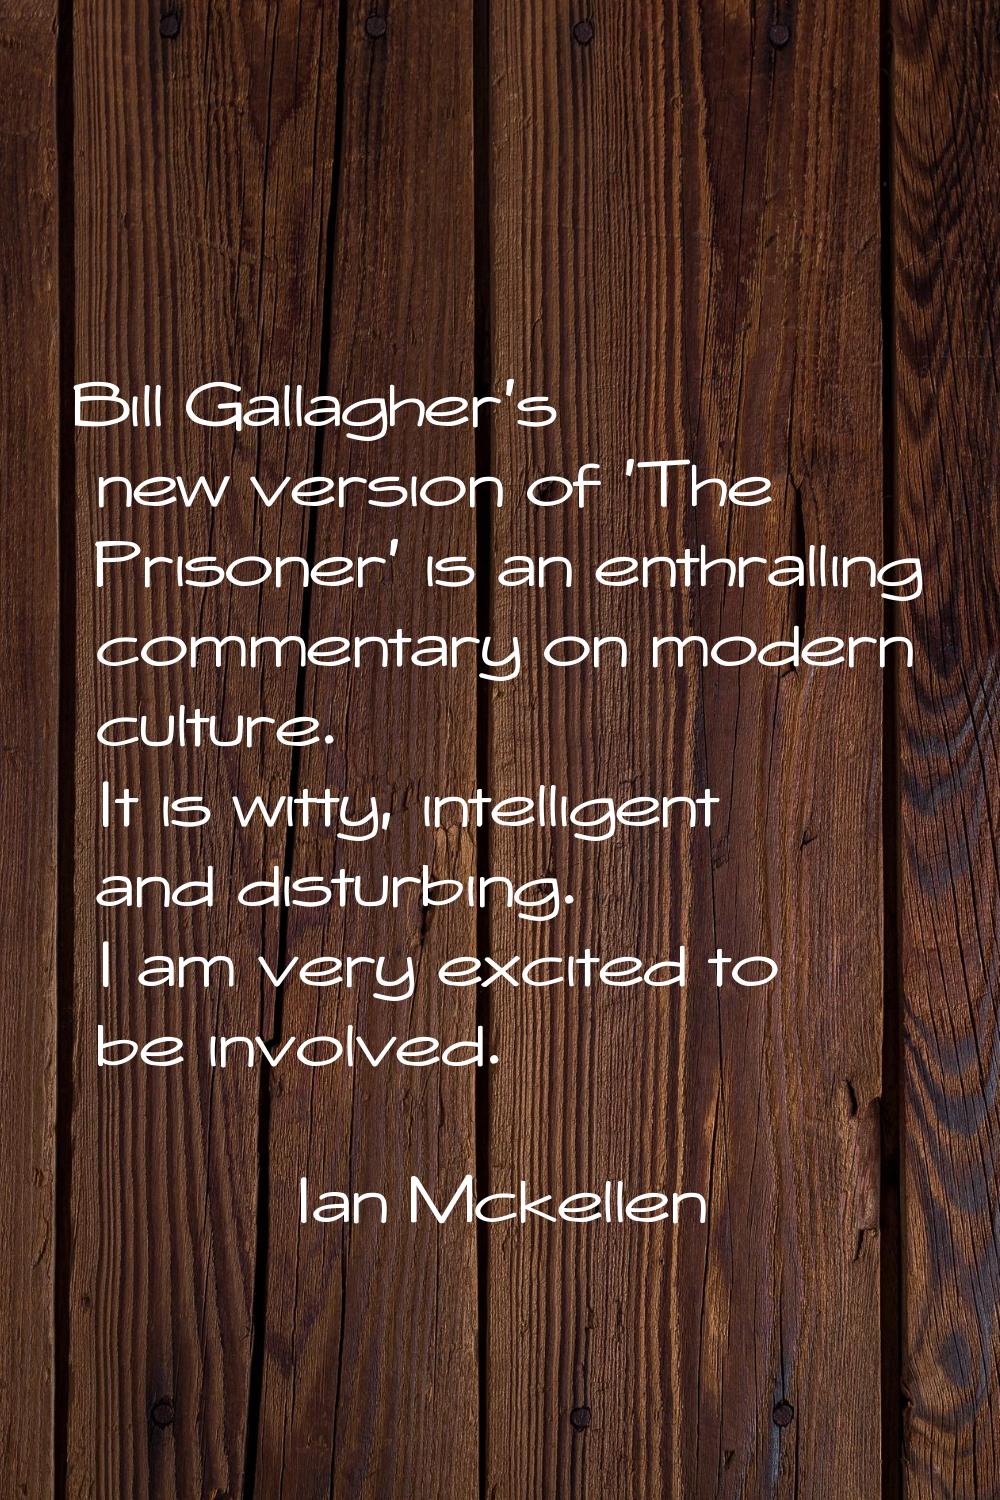 Bill Gallagher's new version of 'The Prisoner' is an enthralling commentary on modern culture. It i